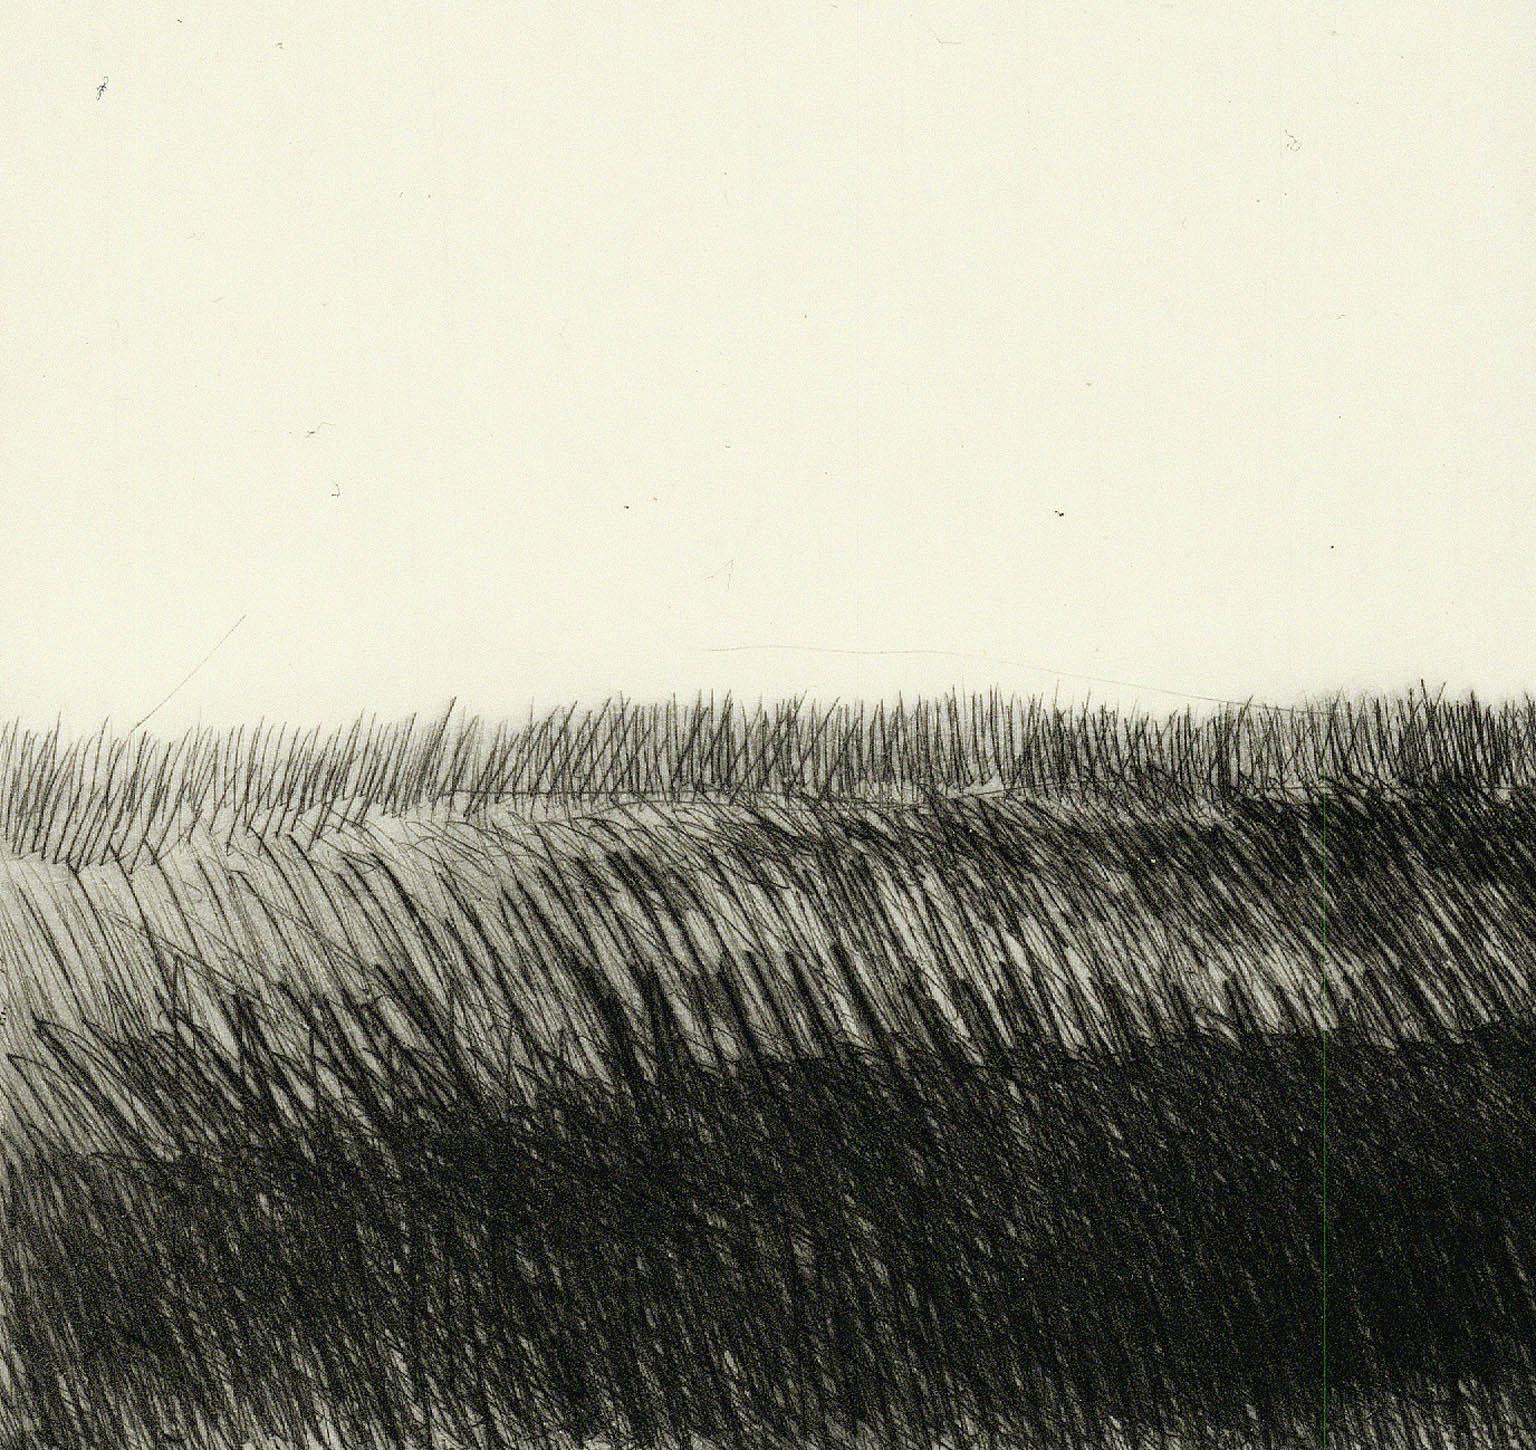 The drypoint engraving entitled 